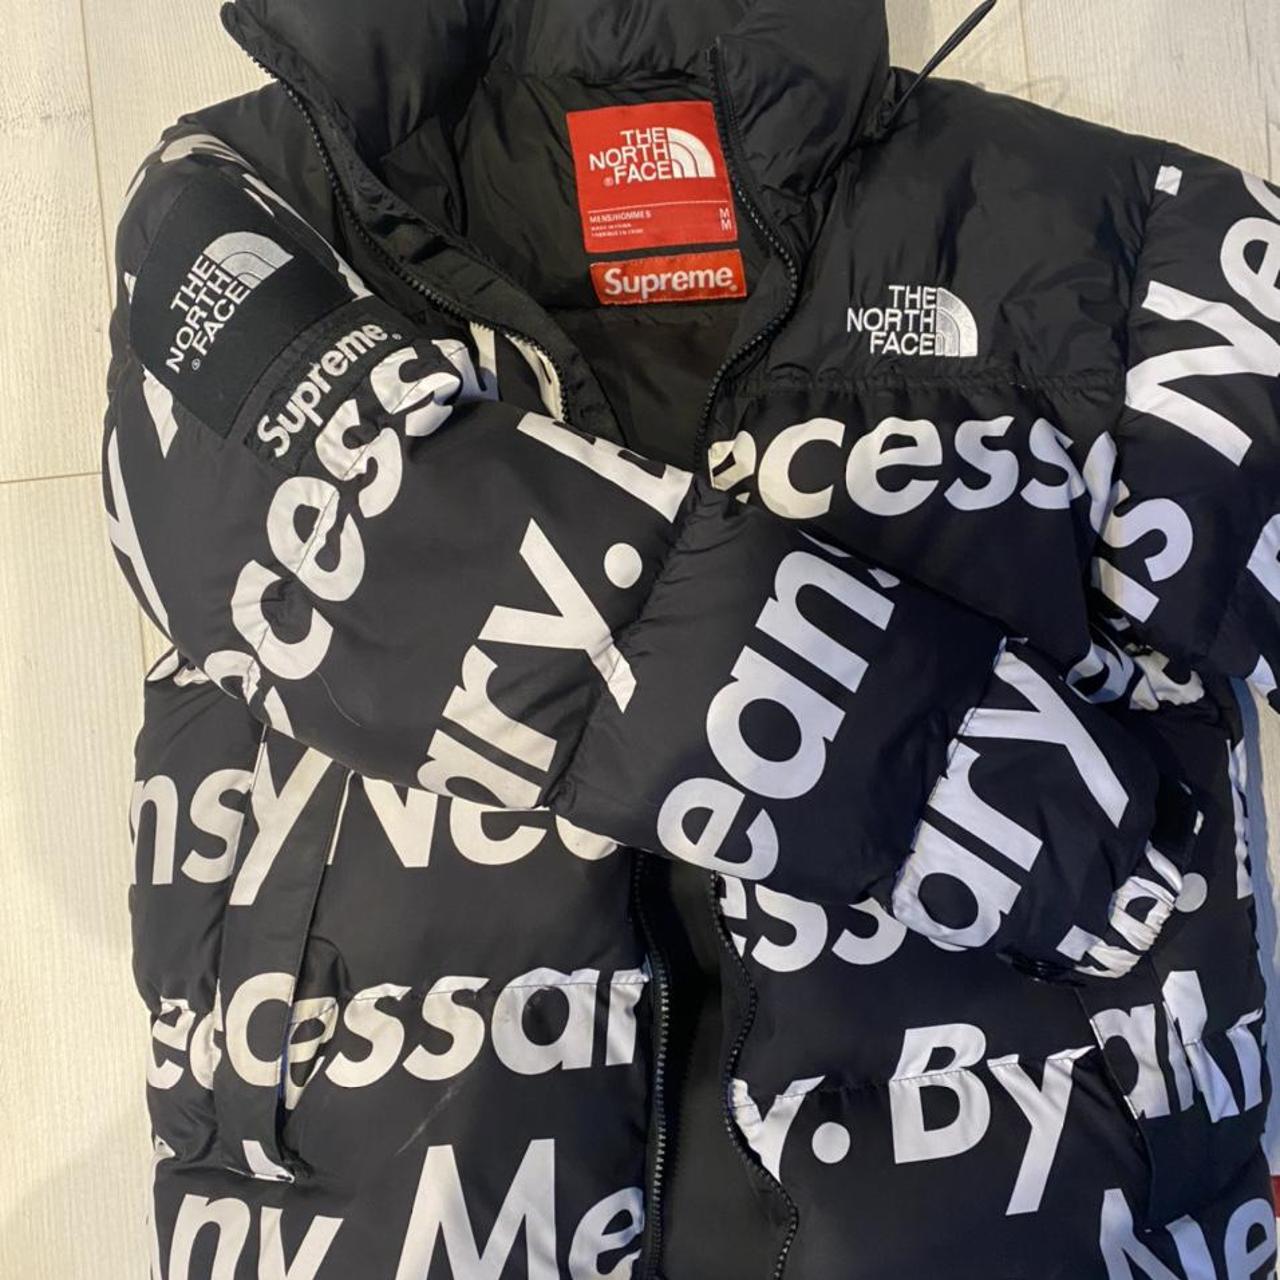 Nupse 700 - Supreme x northface by any means... - Depop